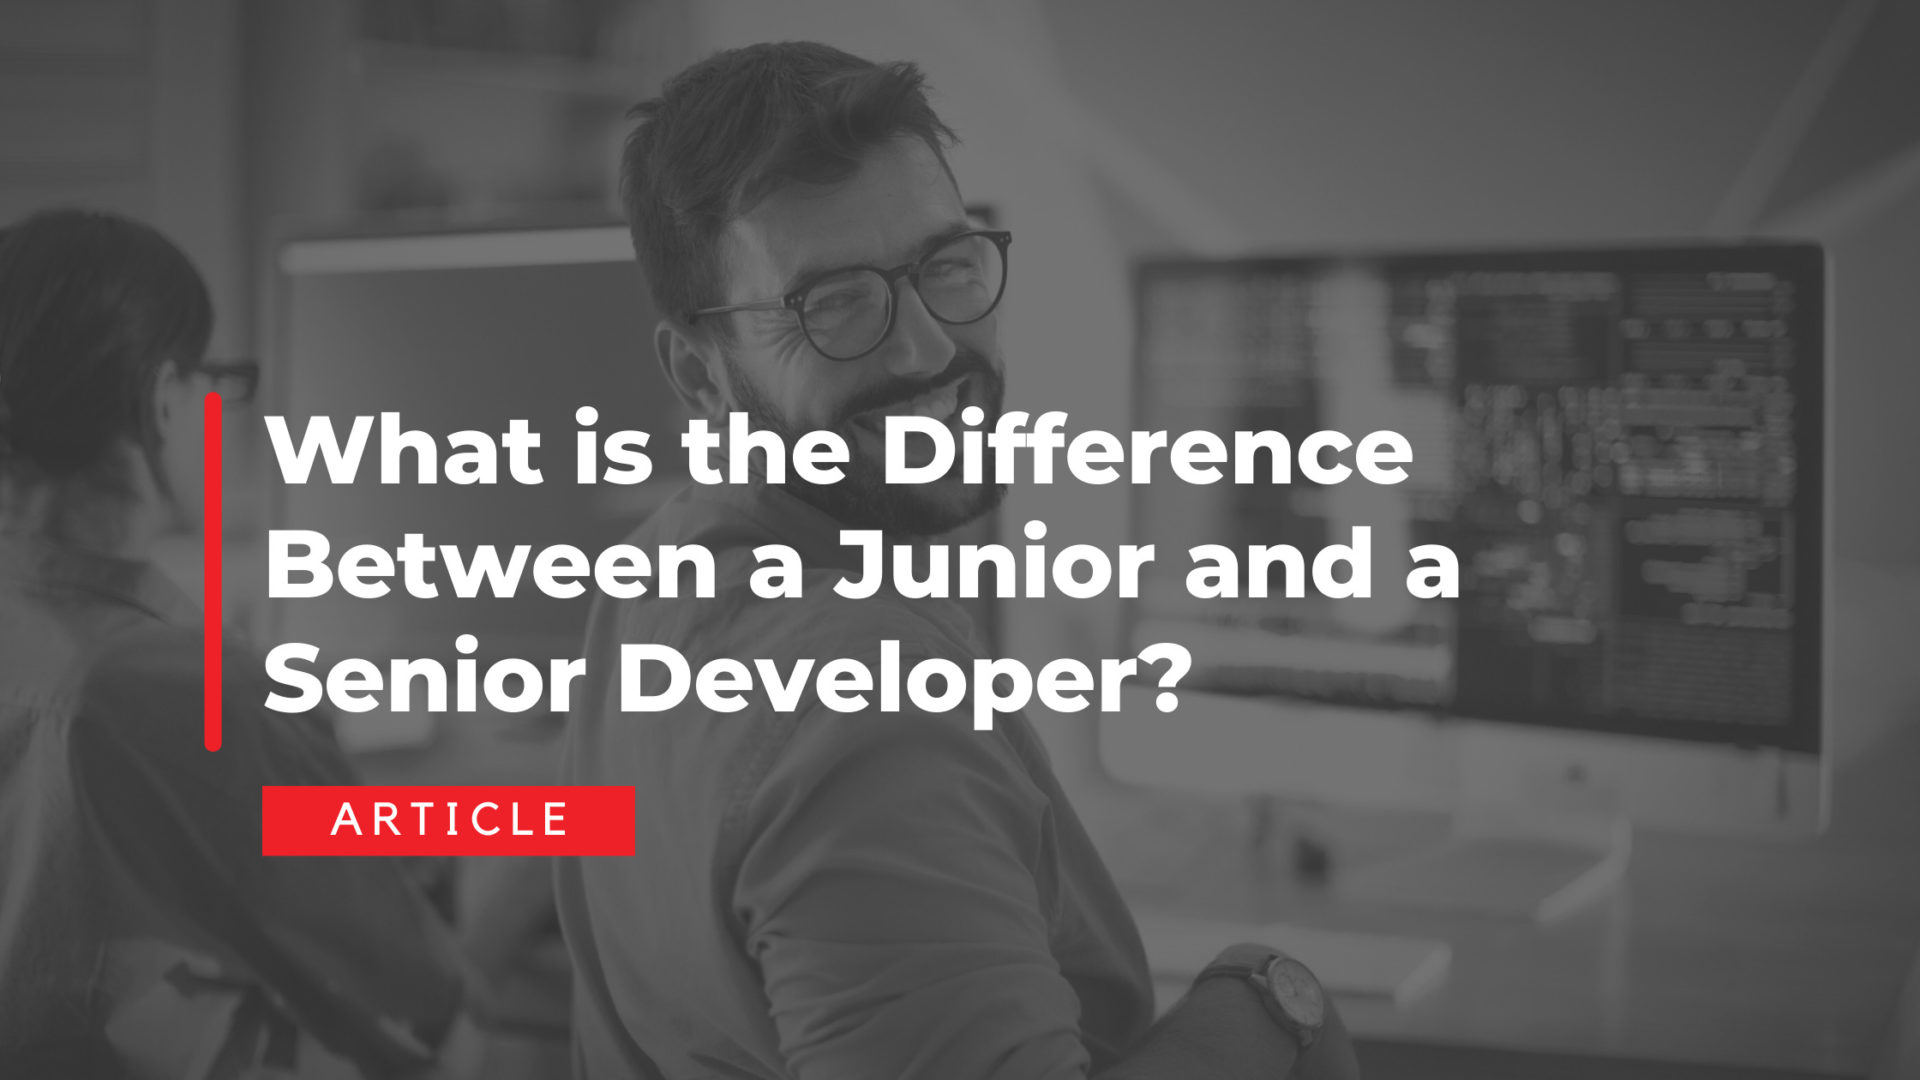 What is the Difference Between a Junior and a Senior in the IT & Tech market?